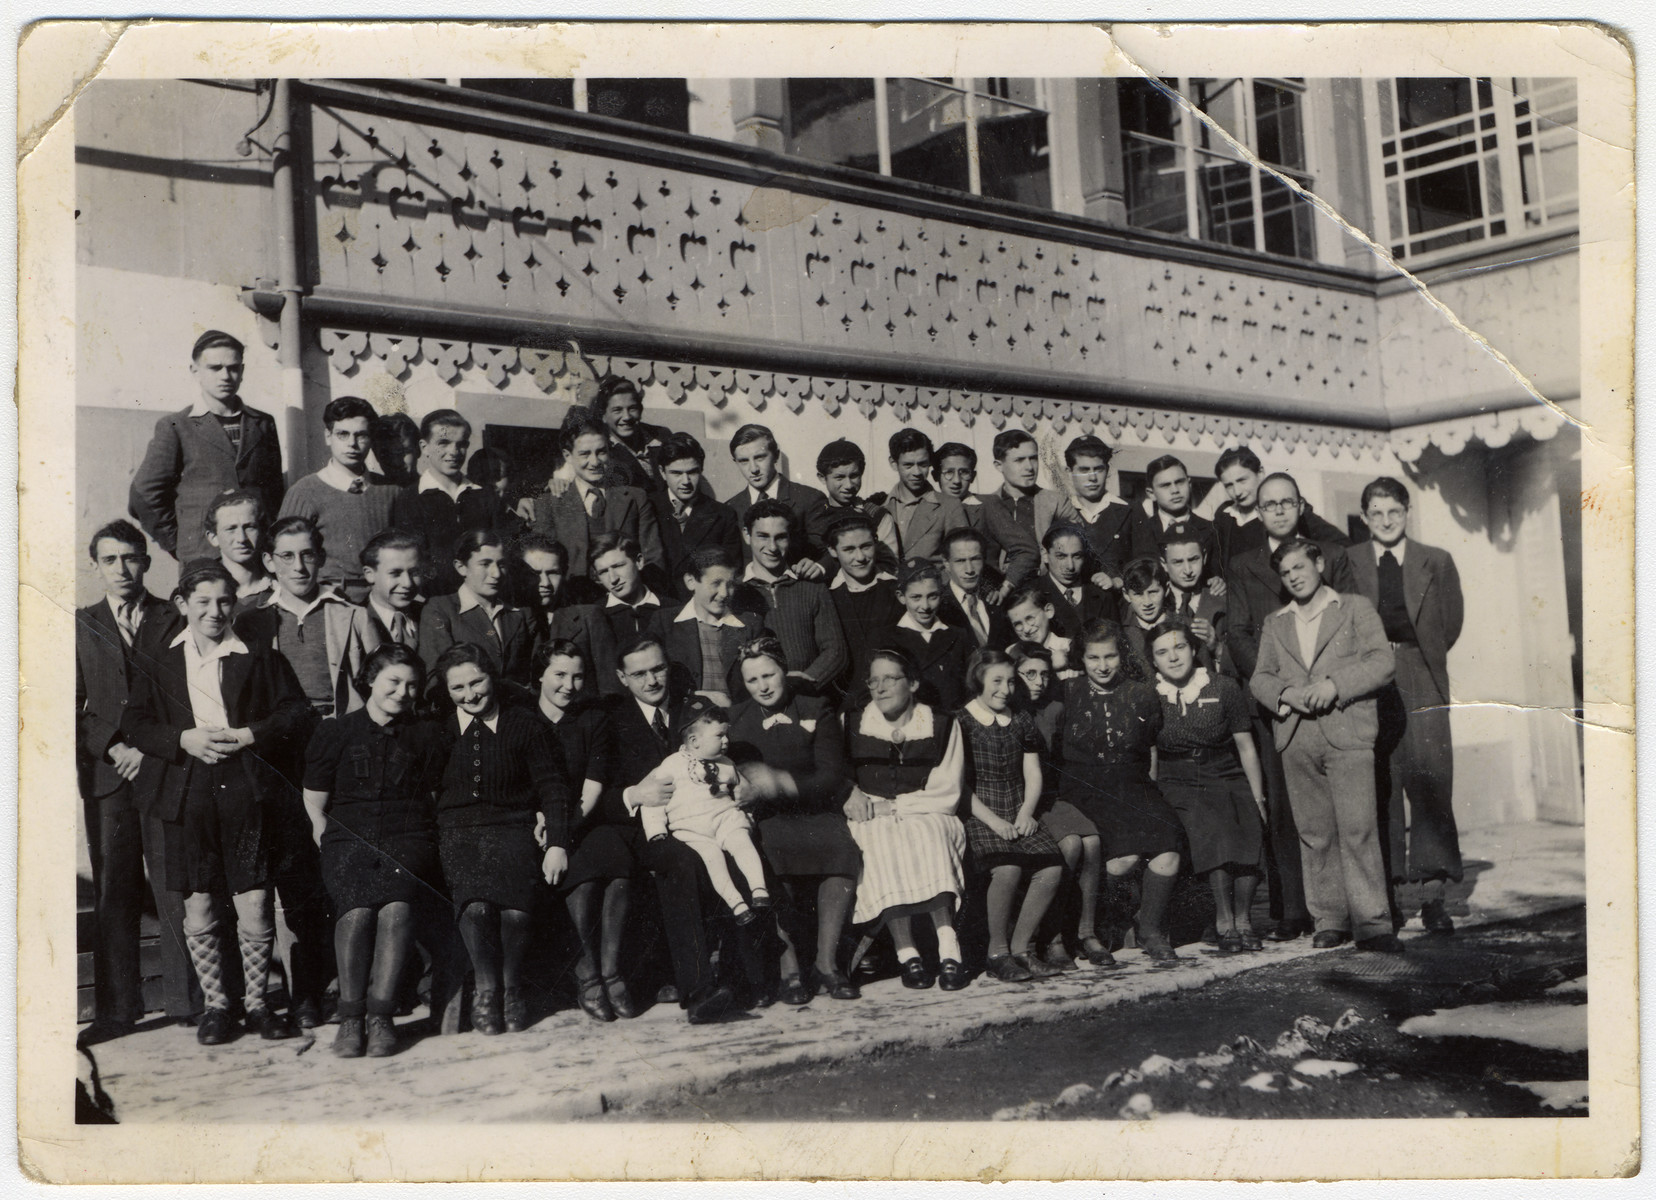 Group portrait of residents of an Orthodox children's home in Basel.

Rabbi Stern is pictured in the front row, center with his wife.  Next to his wife is Miss Riesner, the sewing teacher.  Ruth is sitting next to Miss Riesner.